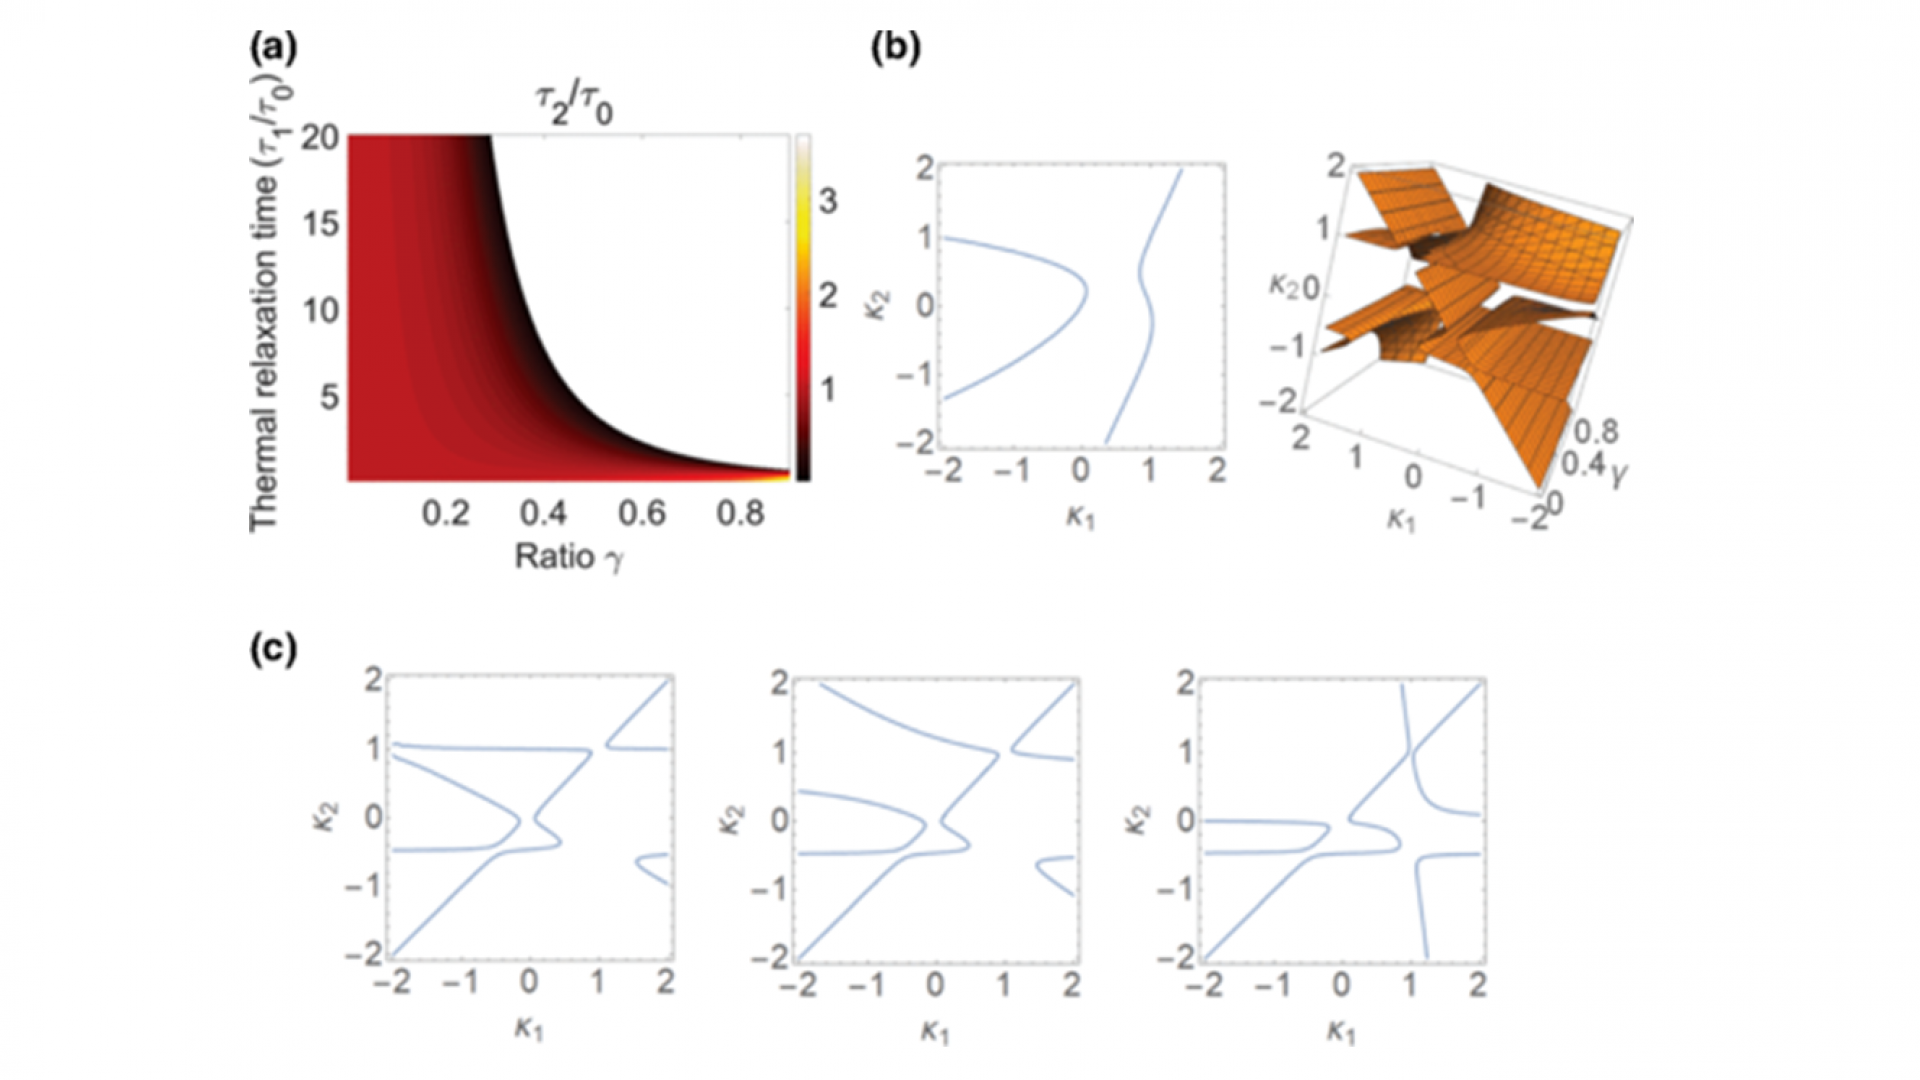 Scattering cancellation-based cloaking for the Maxwell-Cattaneo heat waves